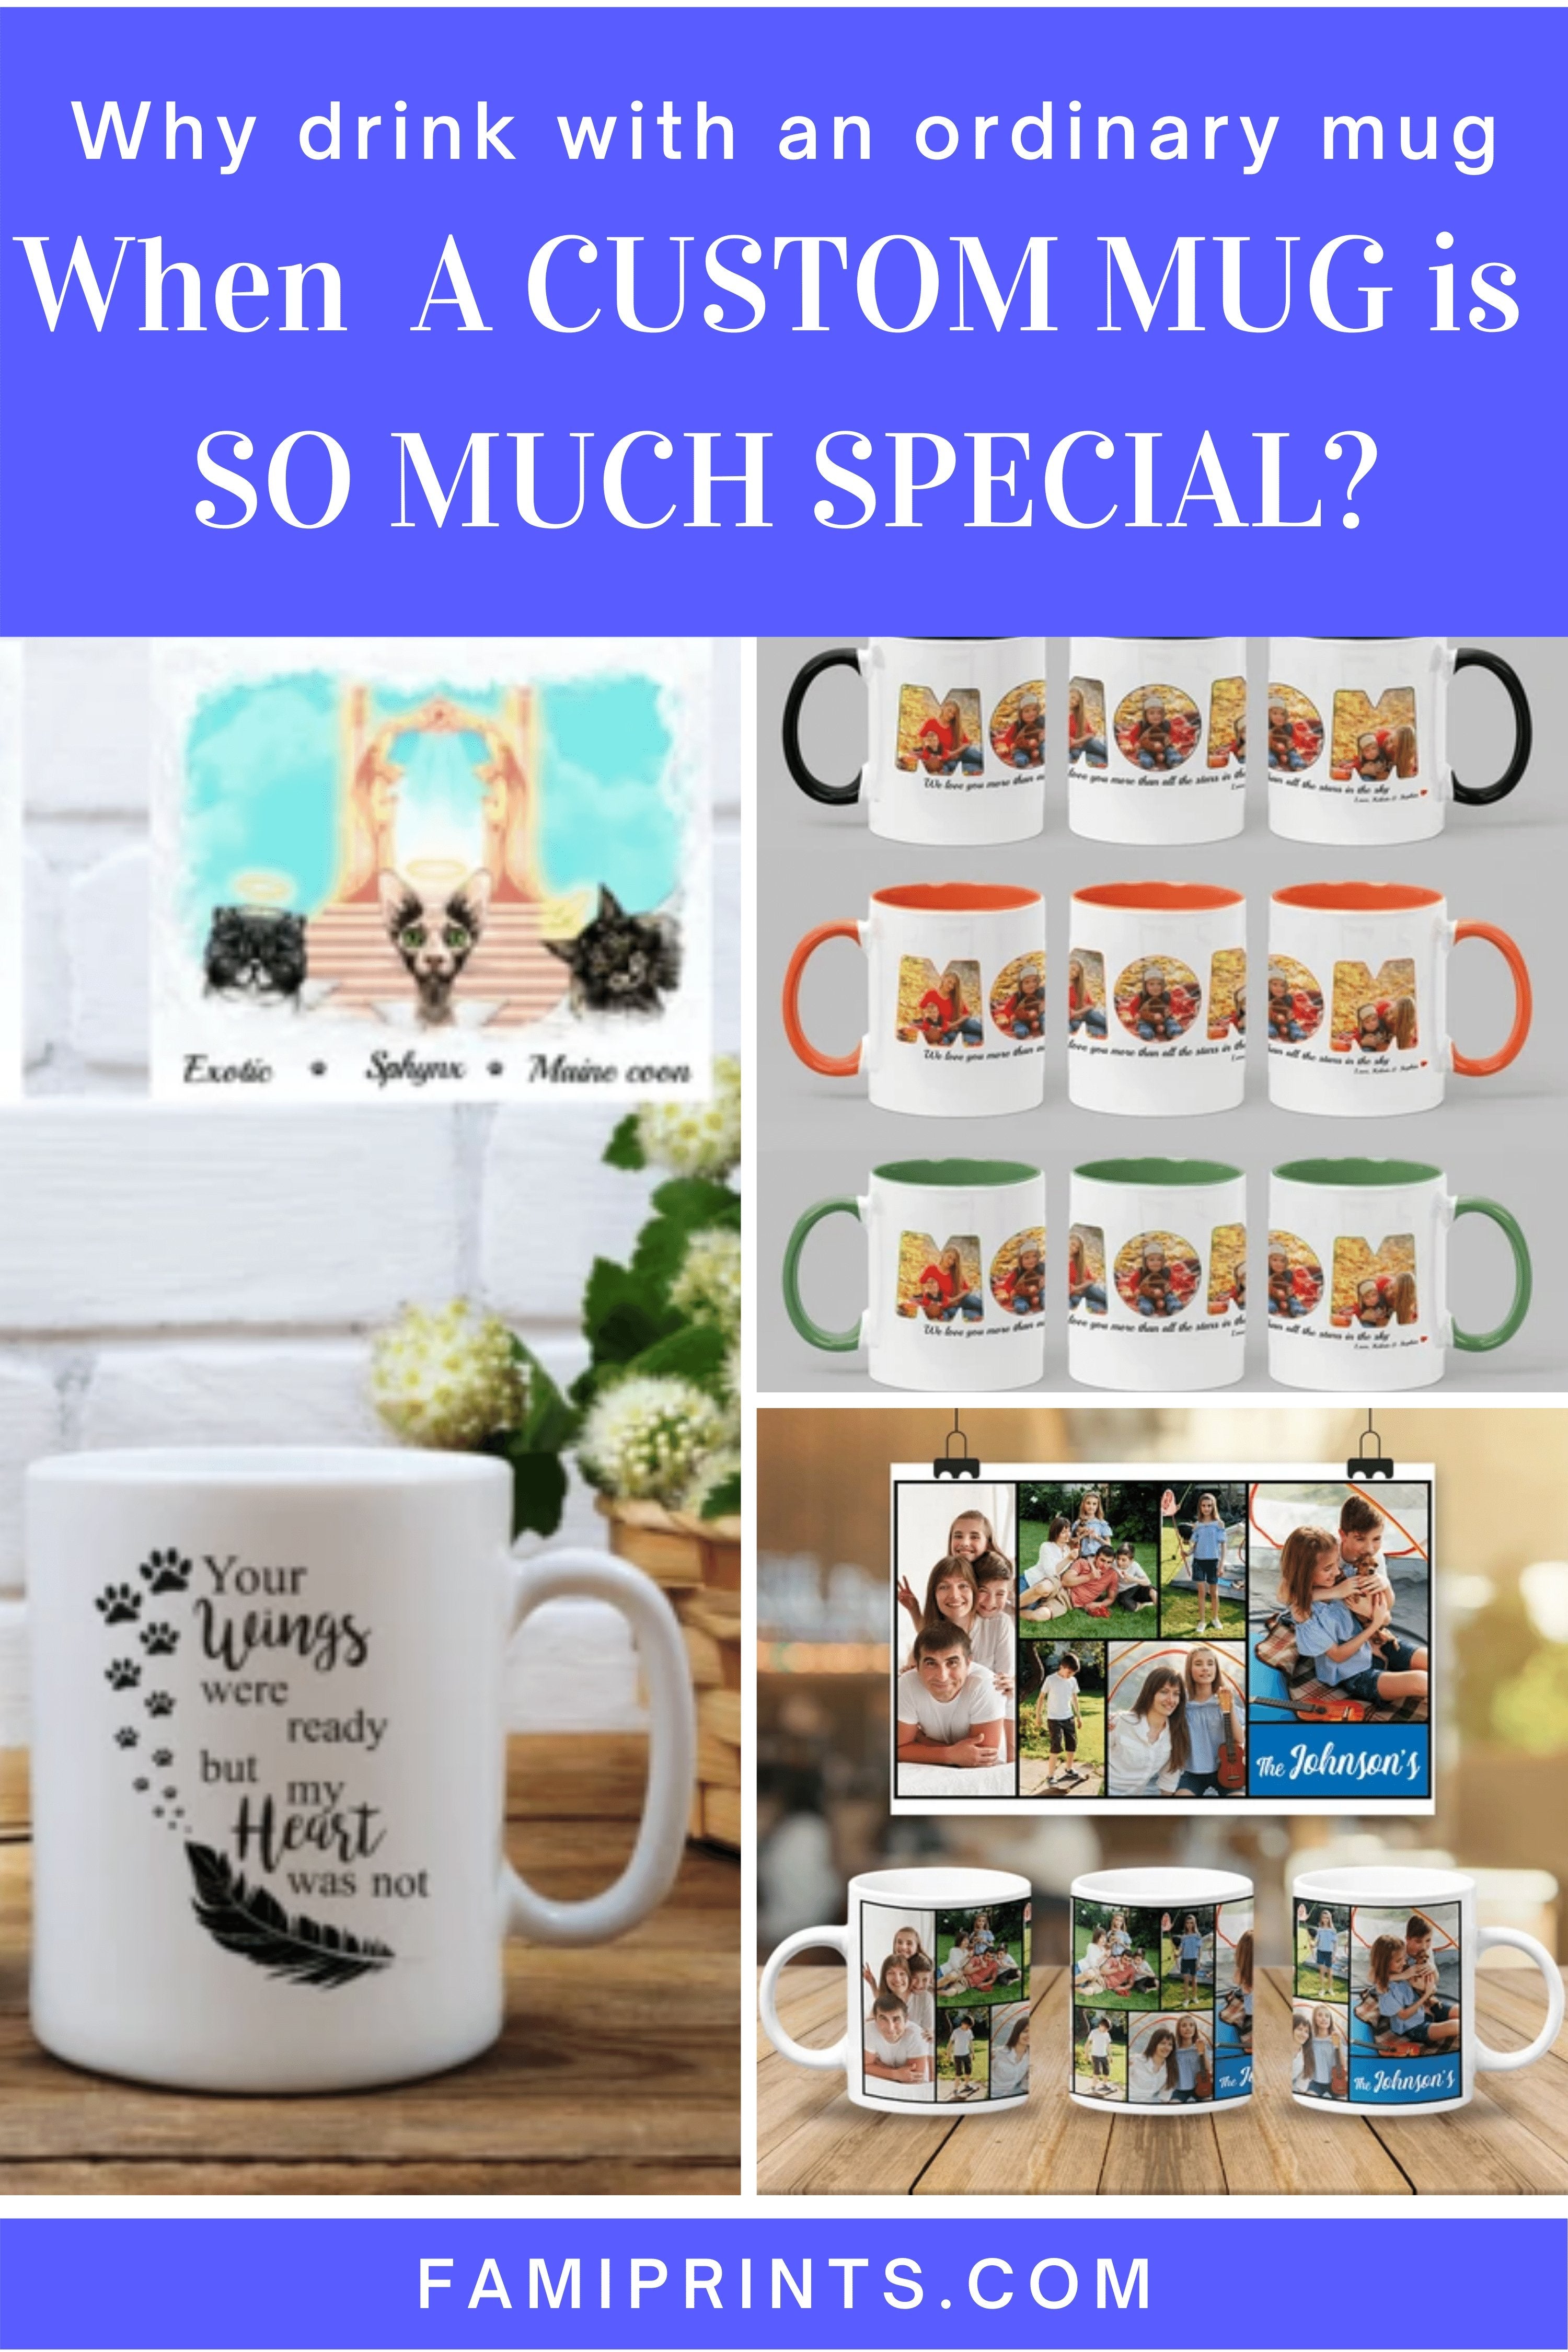 Personalized Mugs For Family | FamiPrints | Trending Personalized Family Gifts